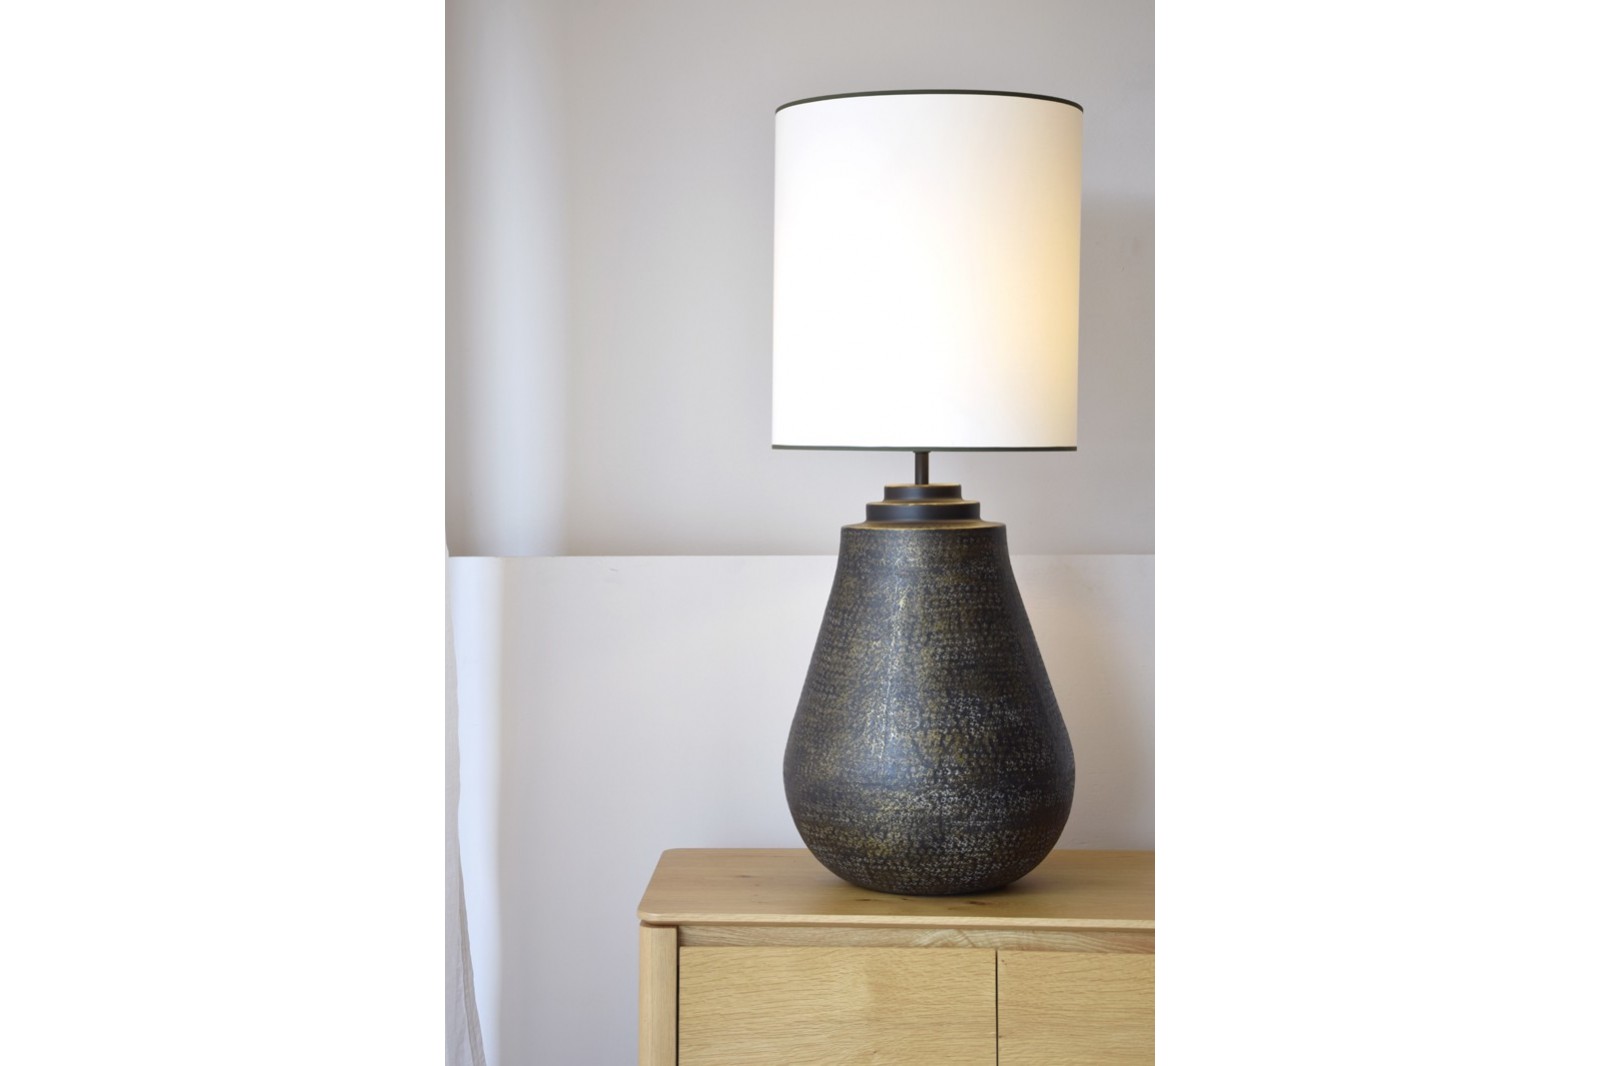 METAL TABLE LAMP N10 WITH SHADE